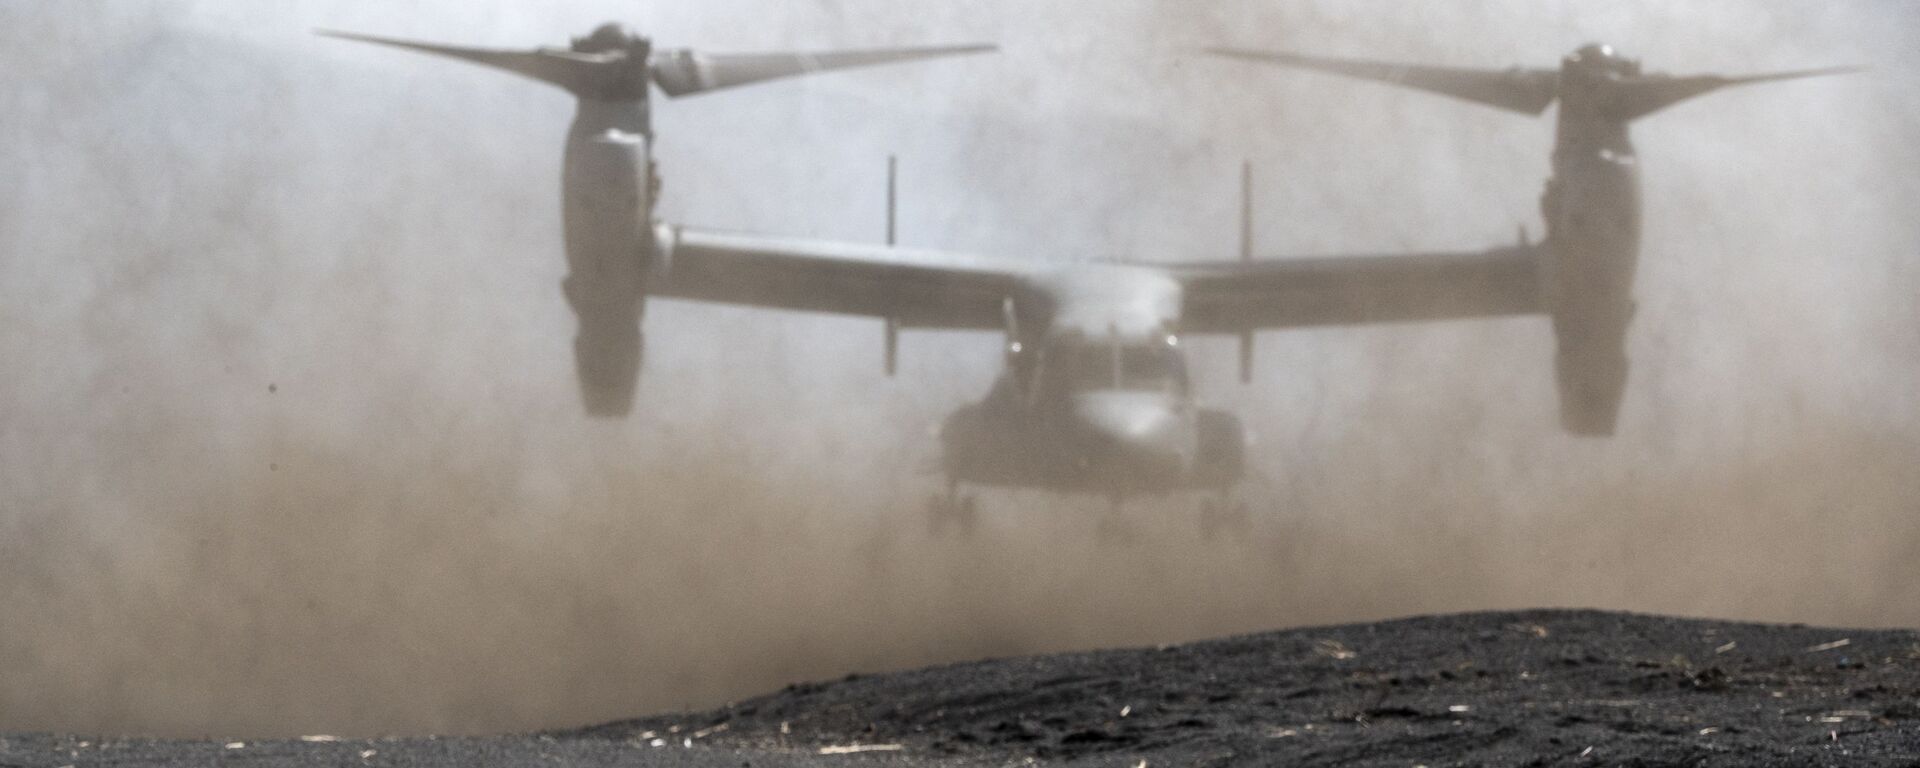 A member of the Japanese Self-Defense Force Amphibious Rapid Deployment Brigade holds position while a US Marine Corps MV-22 Osprey tilt-rotor aircraft takes off during a joint exercise with US Marine Corps personnel at the Higashifuji training area in Gotemba, Shizuoka Prefecture on March 15, 2022.  - Sputnik International, 1920, 09.12.2023